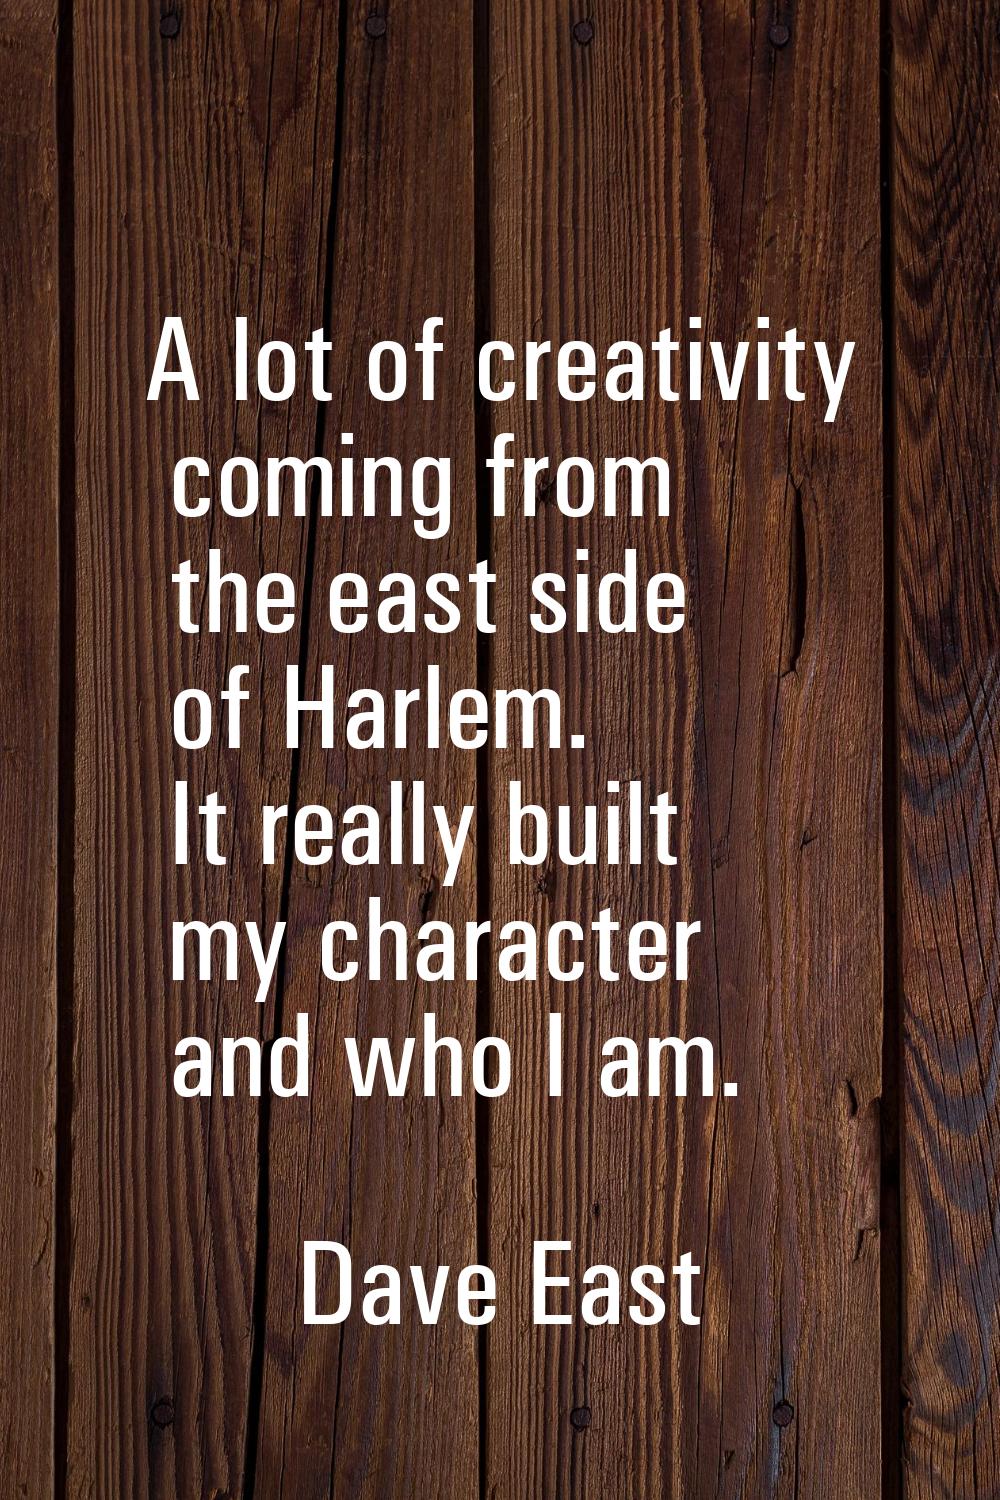 A lot of creativity coming from the east side of Harlem. It really built my character and who I am.